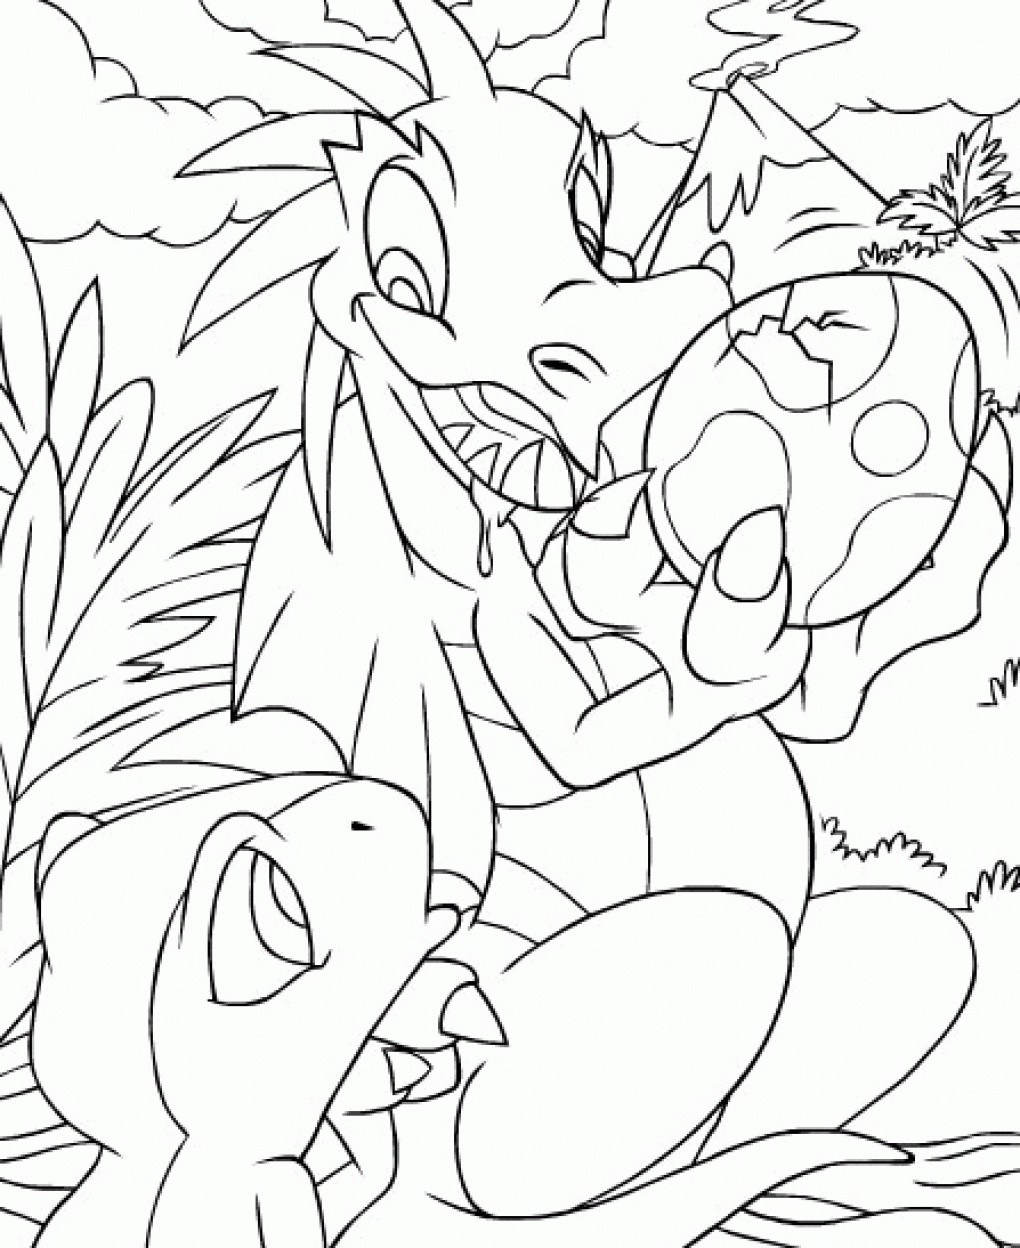 Kids On Line Coloring Pages
 Free Printable Neopets Coloring Pages For kids